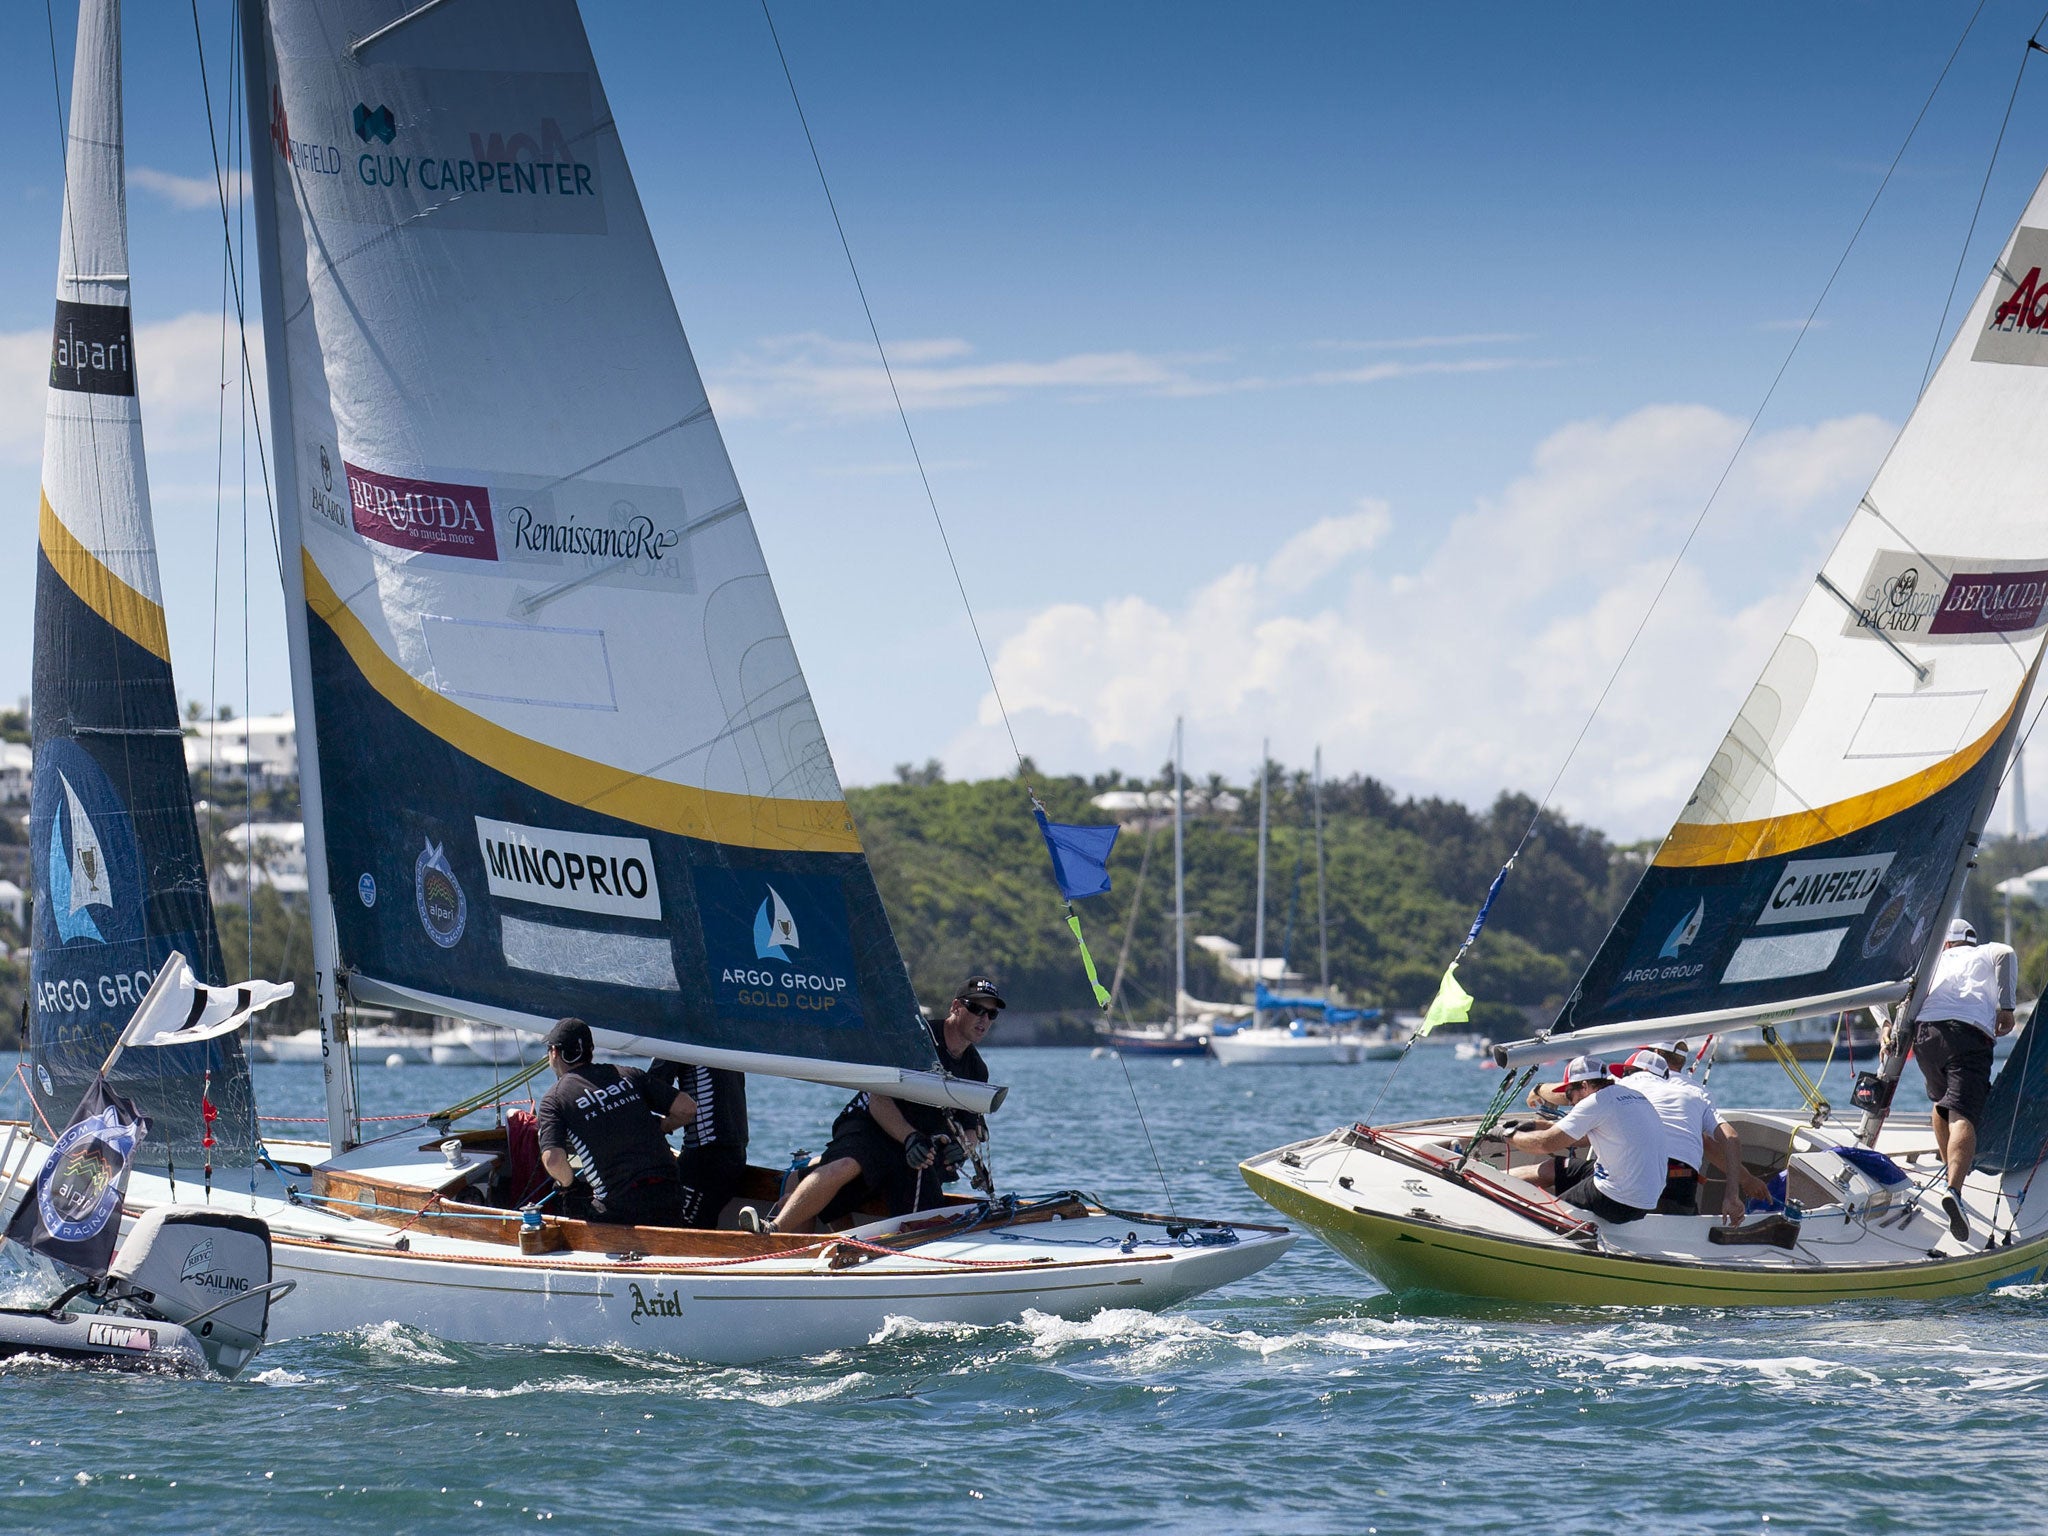 Adam Minoprio (NZL) went one way and Taylor Canfield (USVI) went the other on Hamilton Harbour, Bermuda, but both won a place in the quarter finals of the Argo Group-sponsored King Edward VII Gold Cup, the penultimate regatta in the Alpari World Match Rac